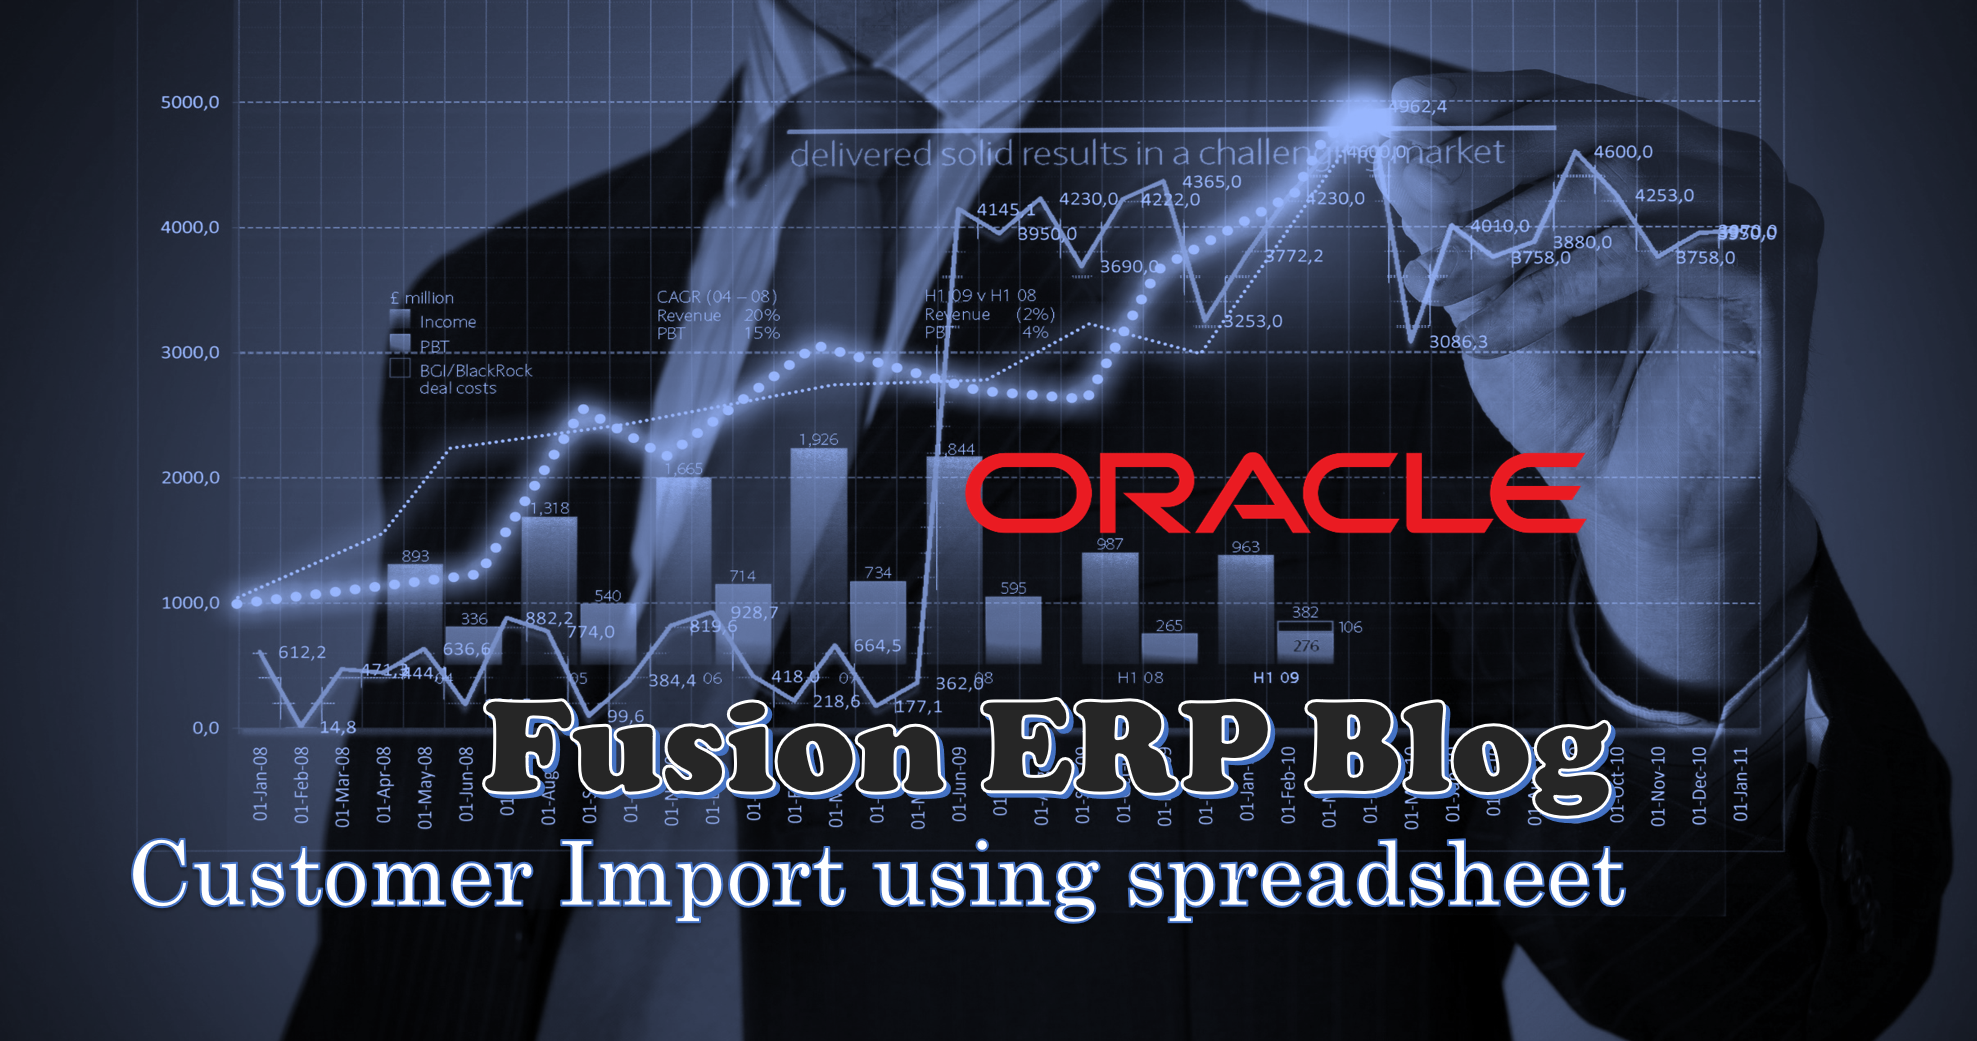 Customer Import in Fusion ERP using spreadsheet